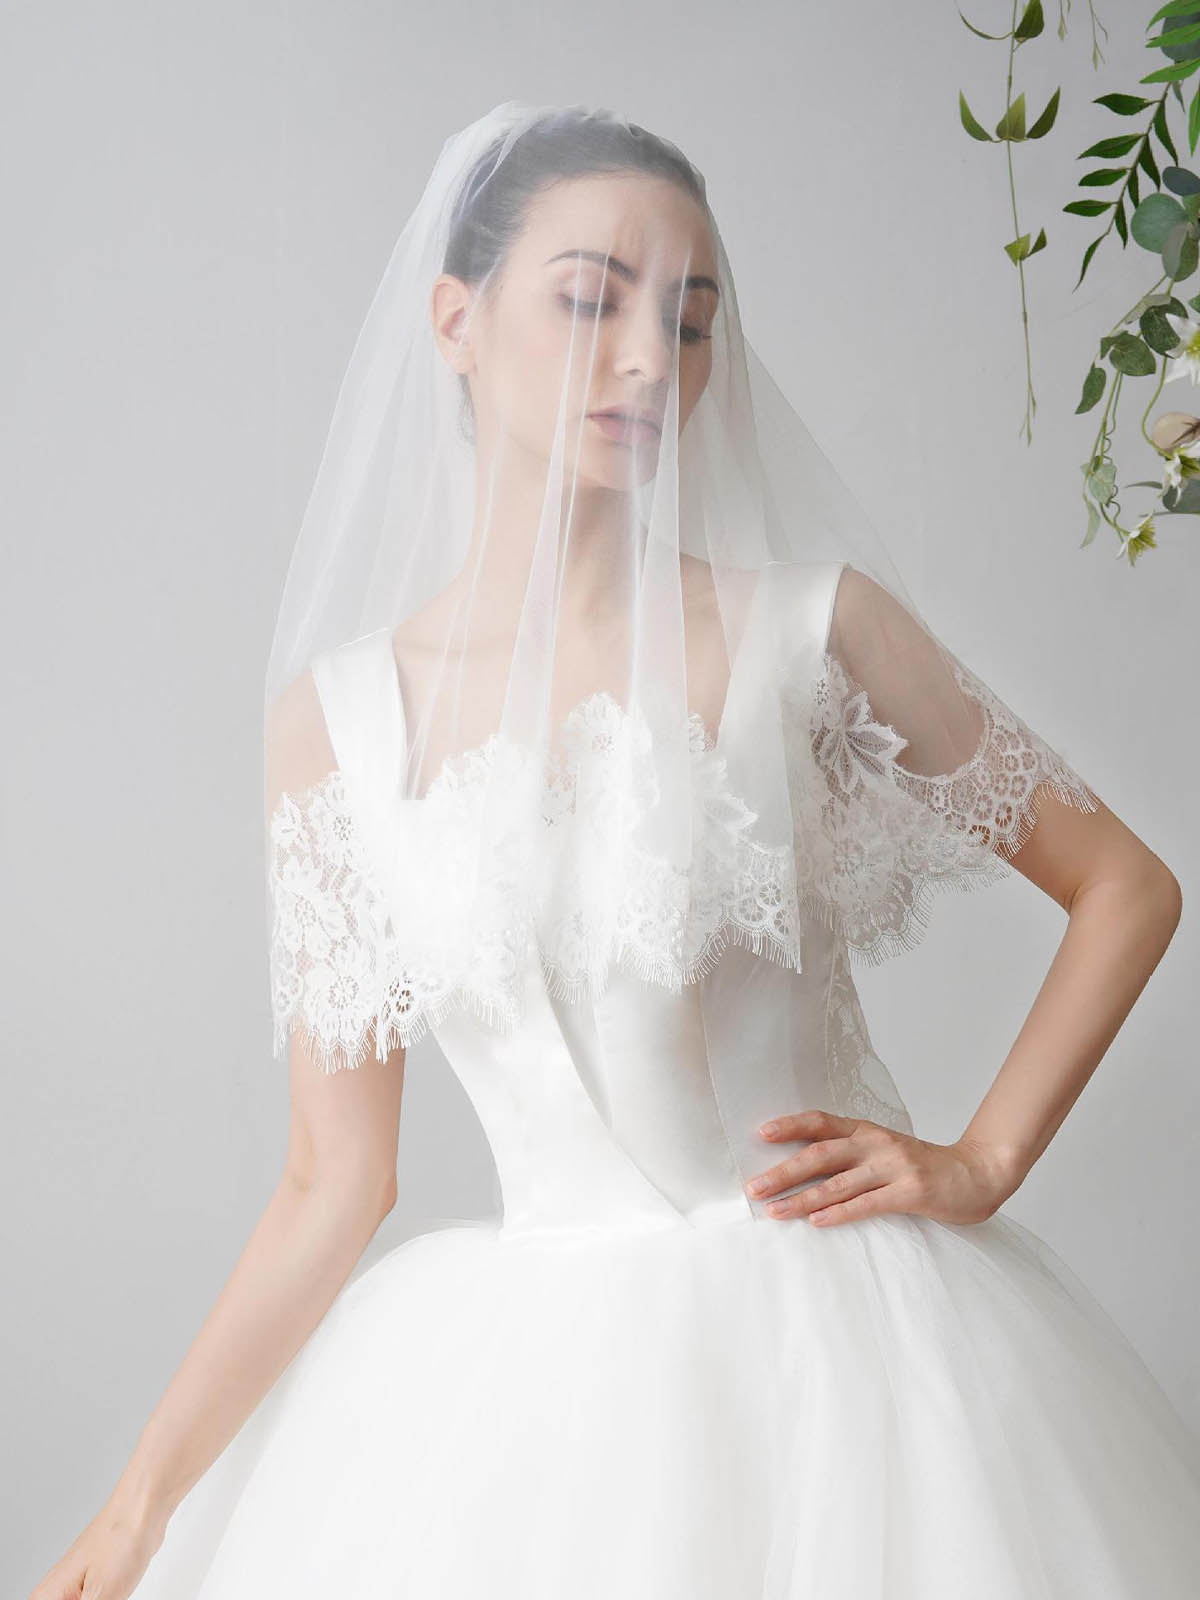 Dreamy Two Layer Short Lace Bridal Veil